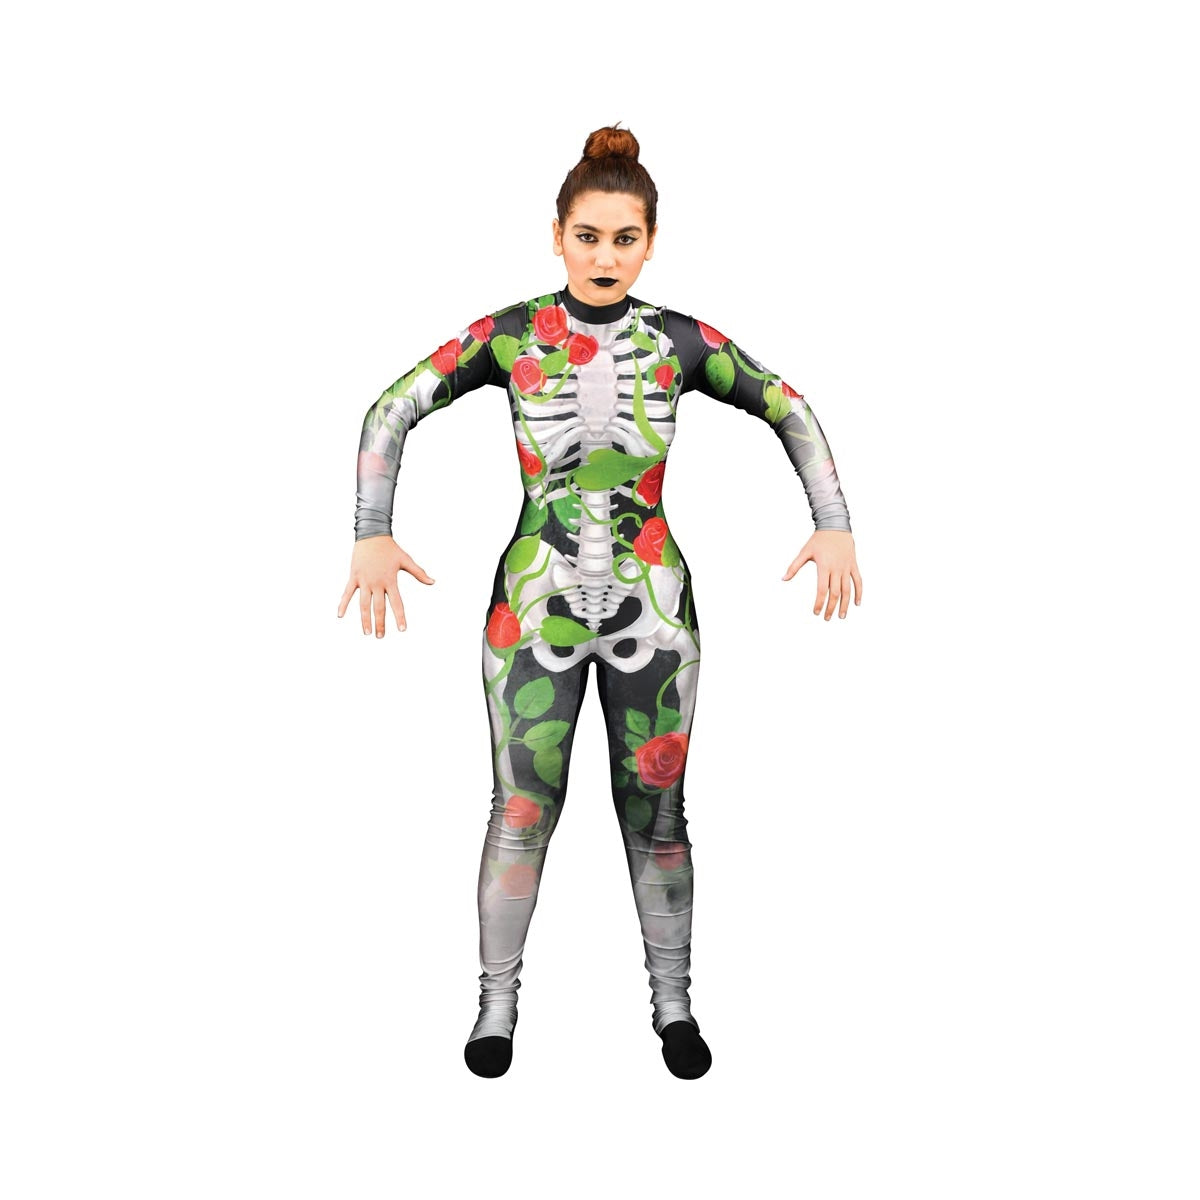 Rose and skeleton color guard costume